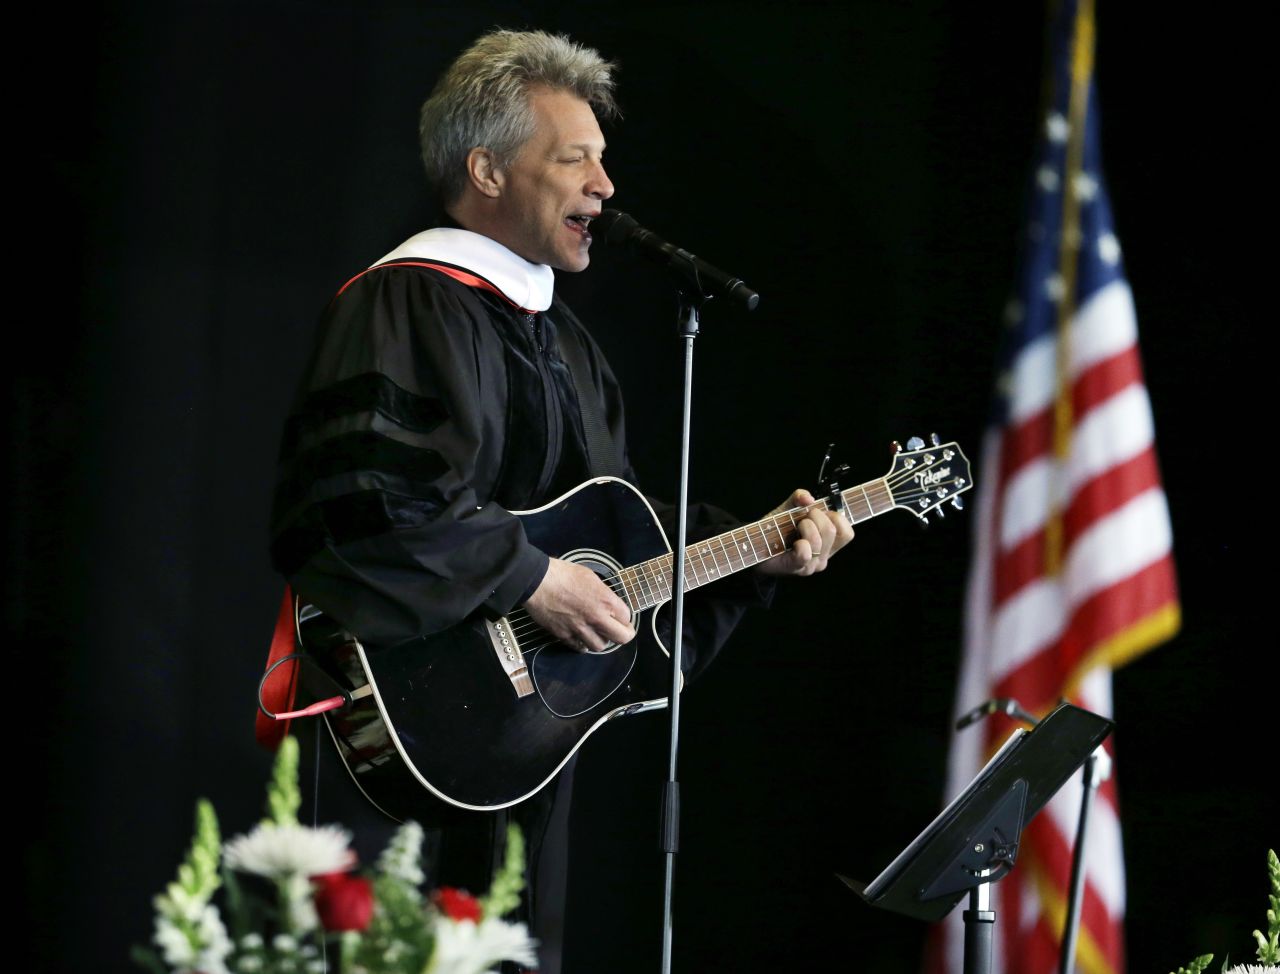 Rock star and philanthropist Jon Bon Jovi performs a new song during graduation ceremonies at Rutgers University on May 21. 